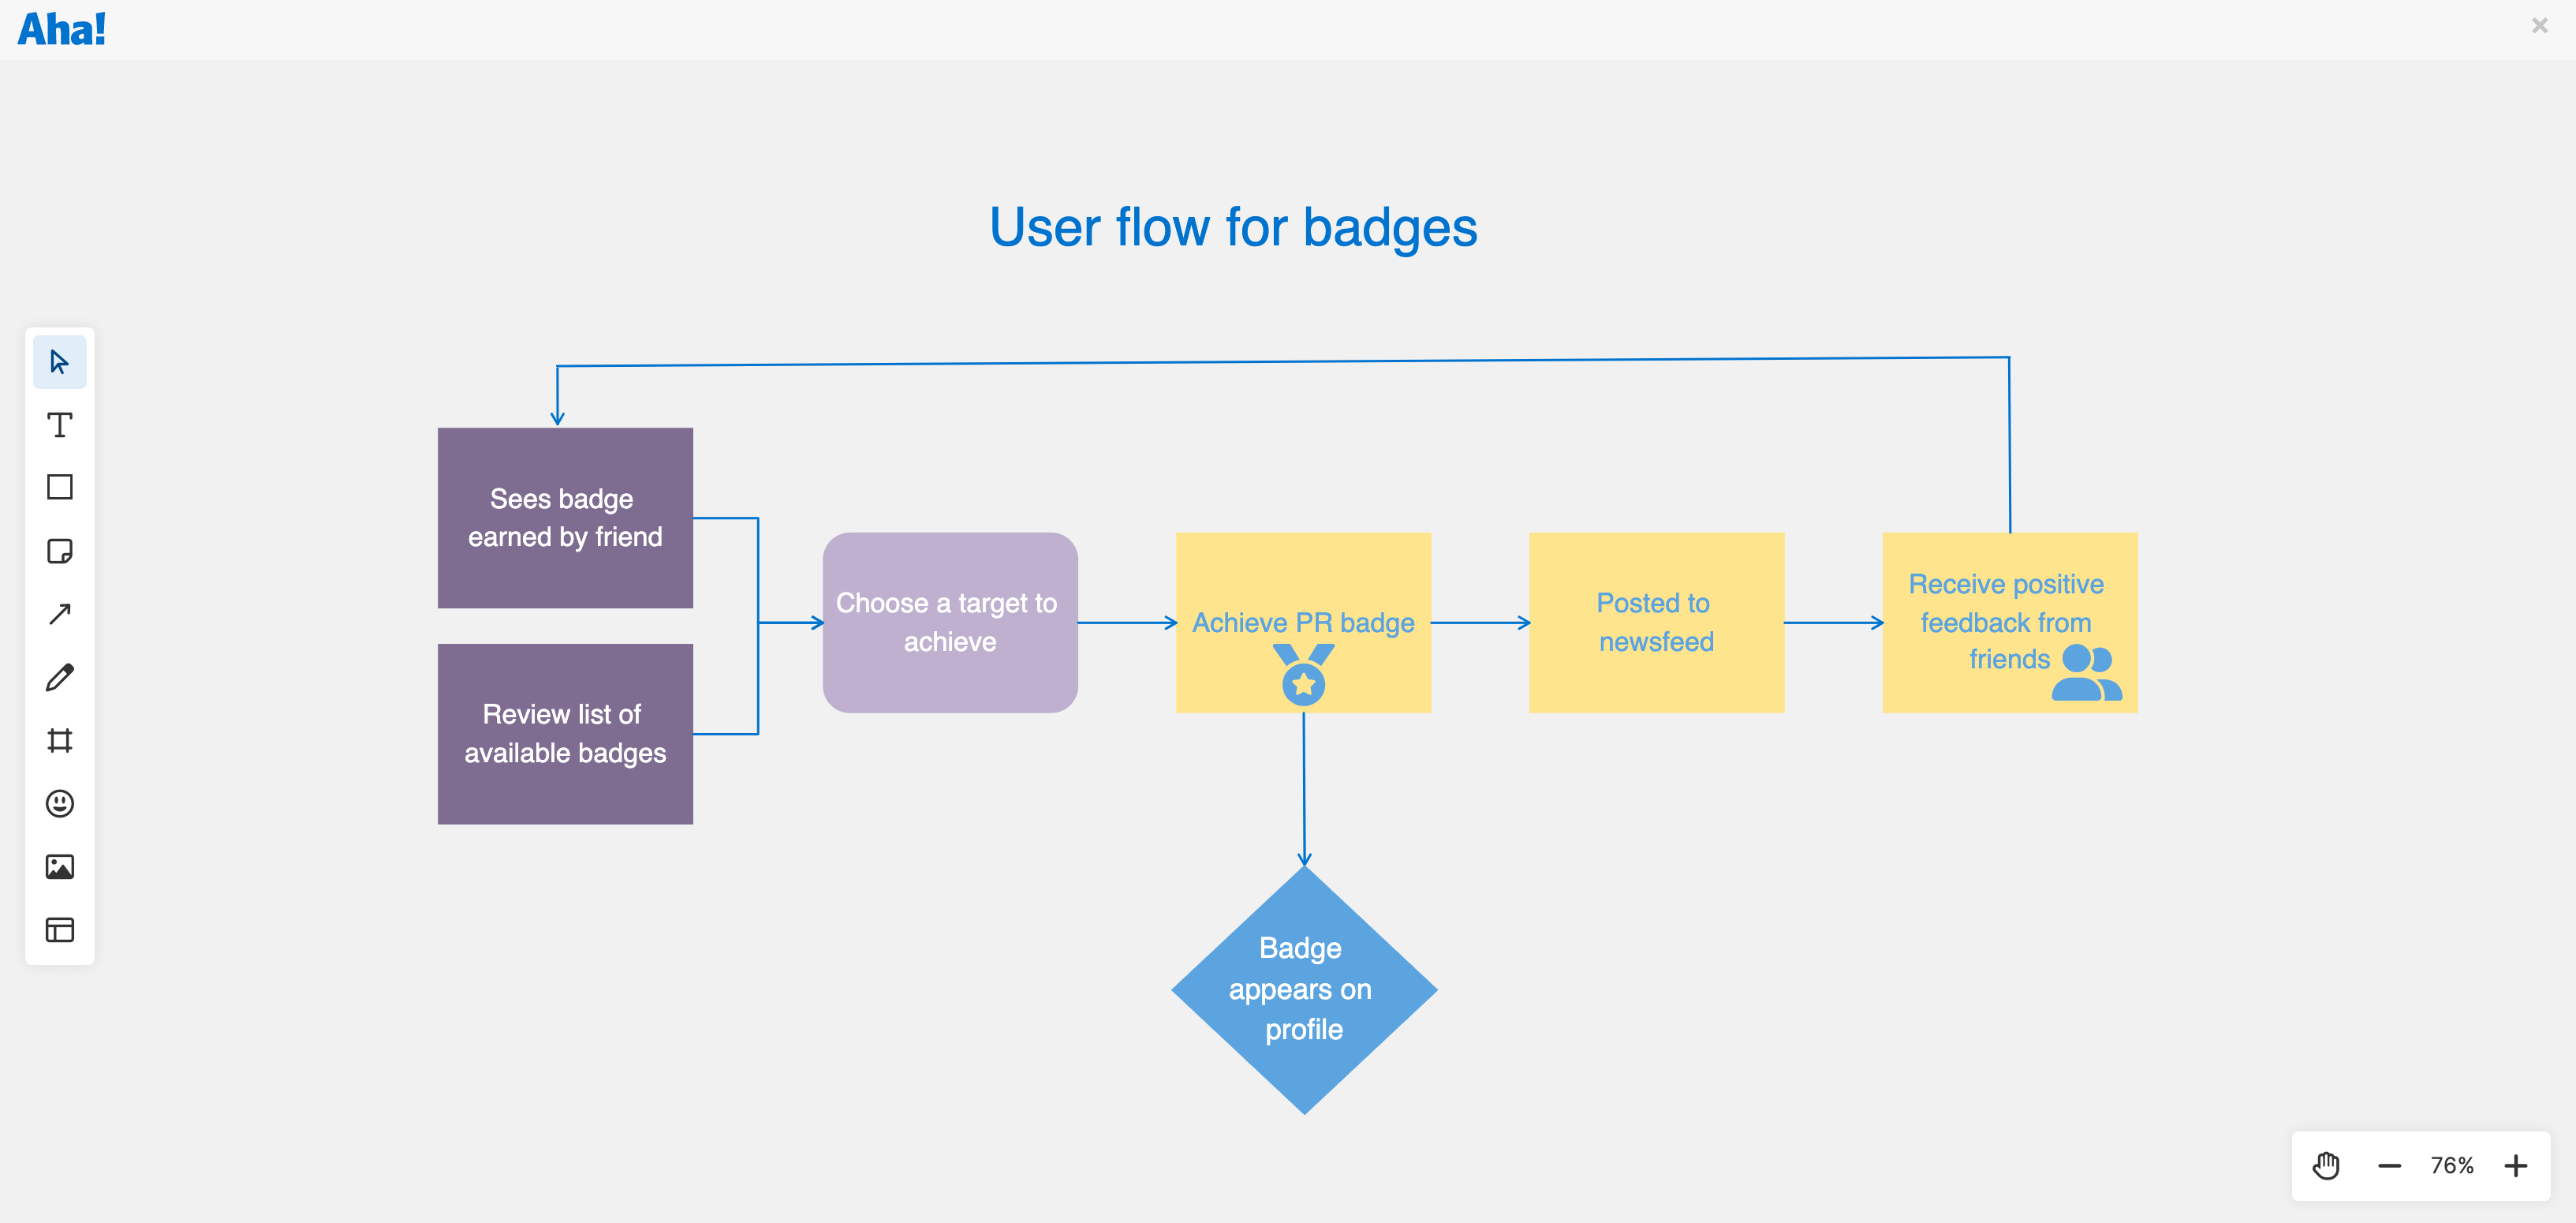 7 Product Diagrams and Flowcharts For Product Managers | Aha! software